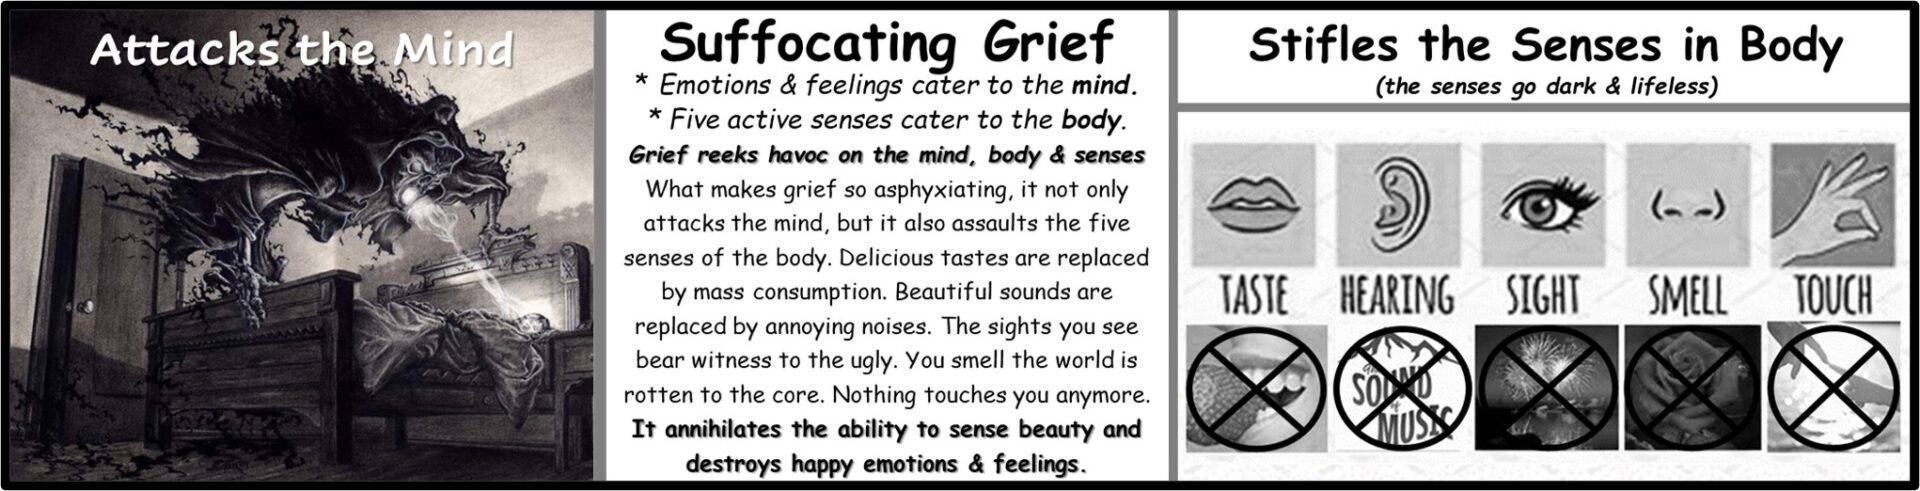 Suffocating Grief